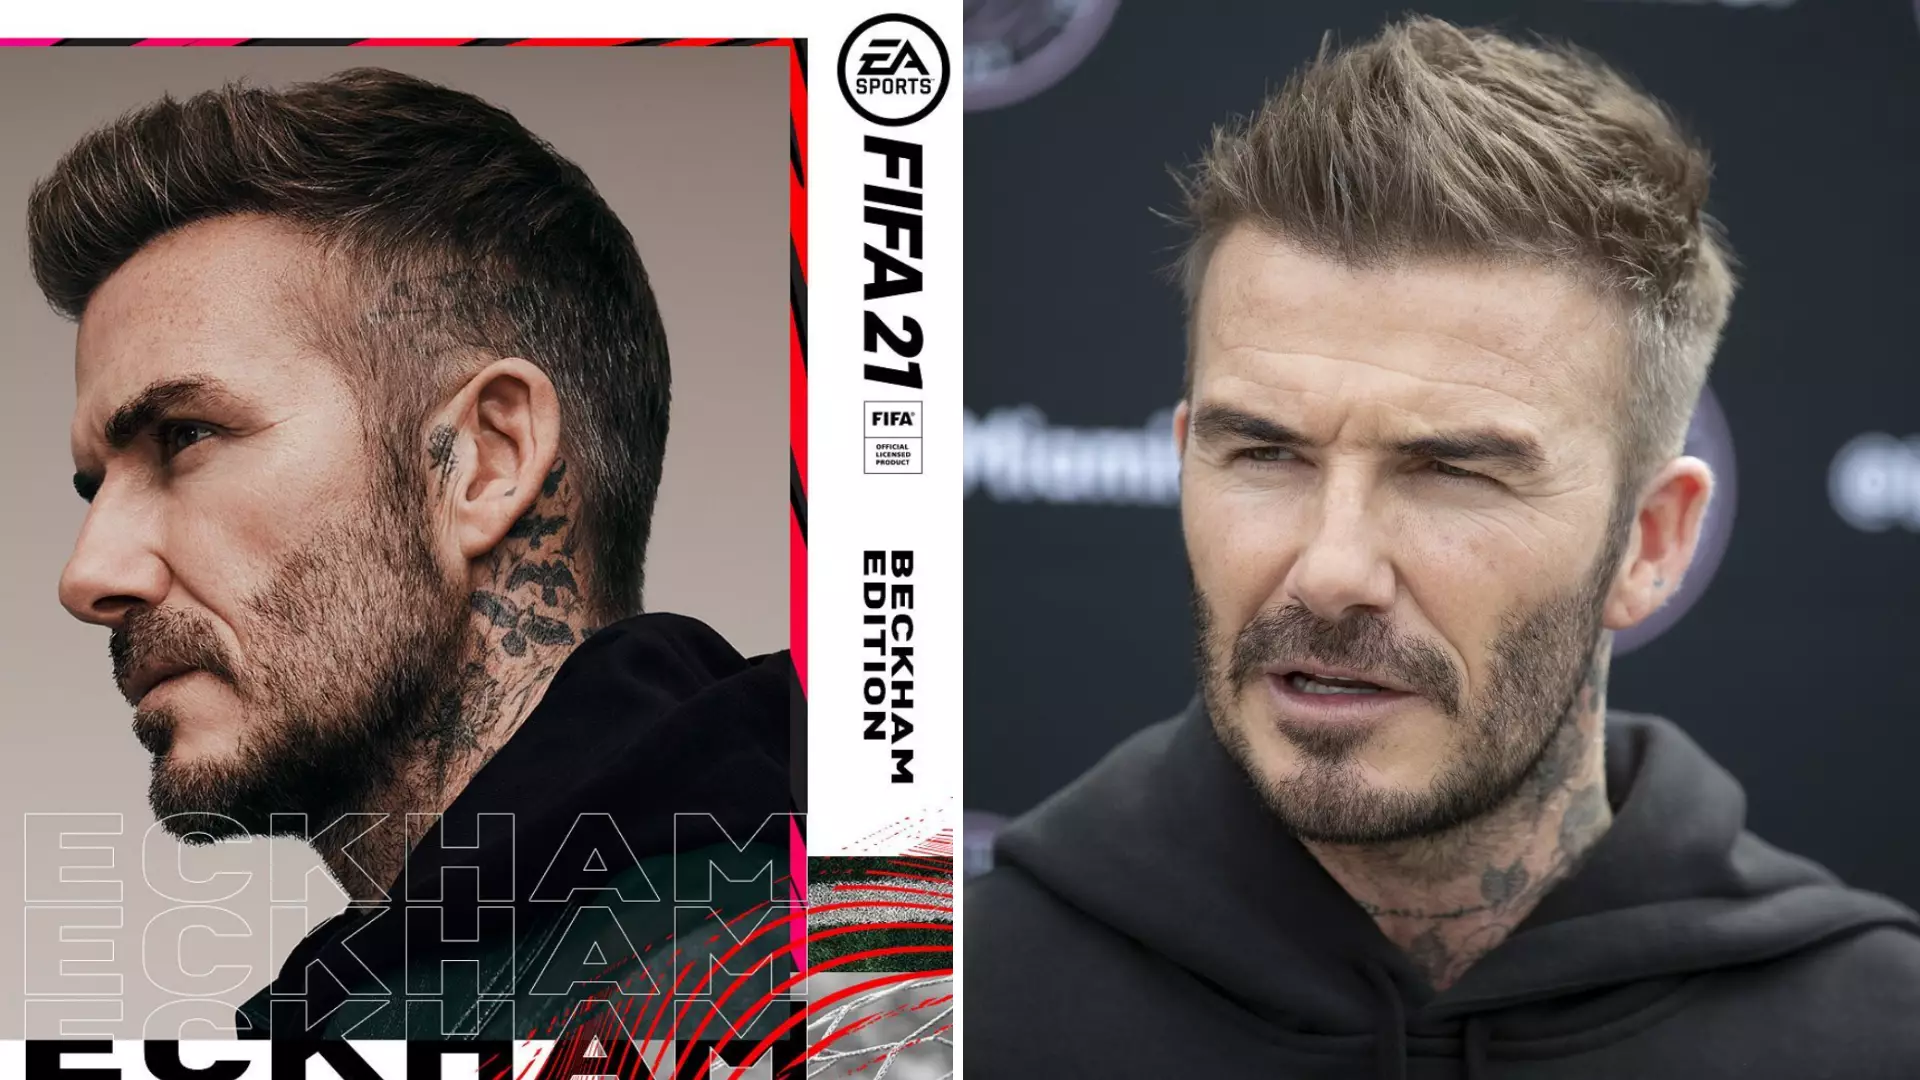 David Beckham's Current-Gen FIFA 21 Face Looks WORSE Than The One Used On Last-Gen Consoles